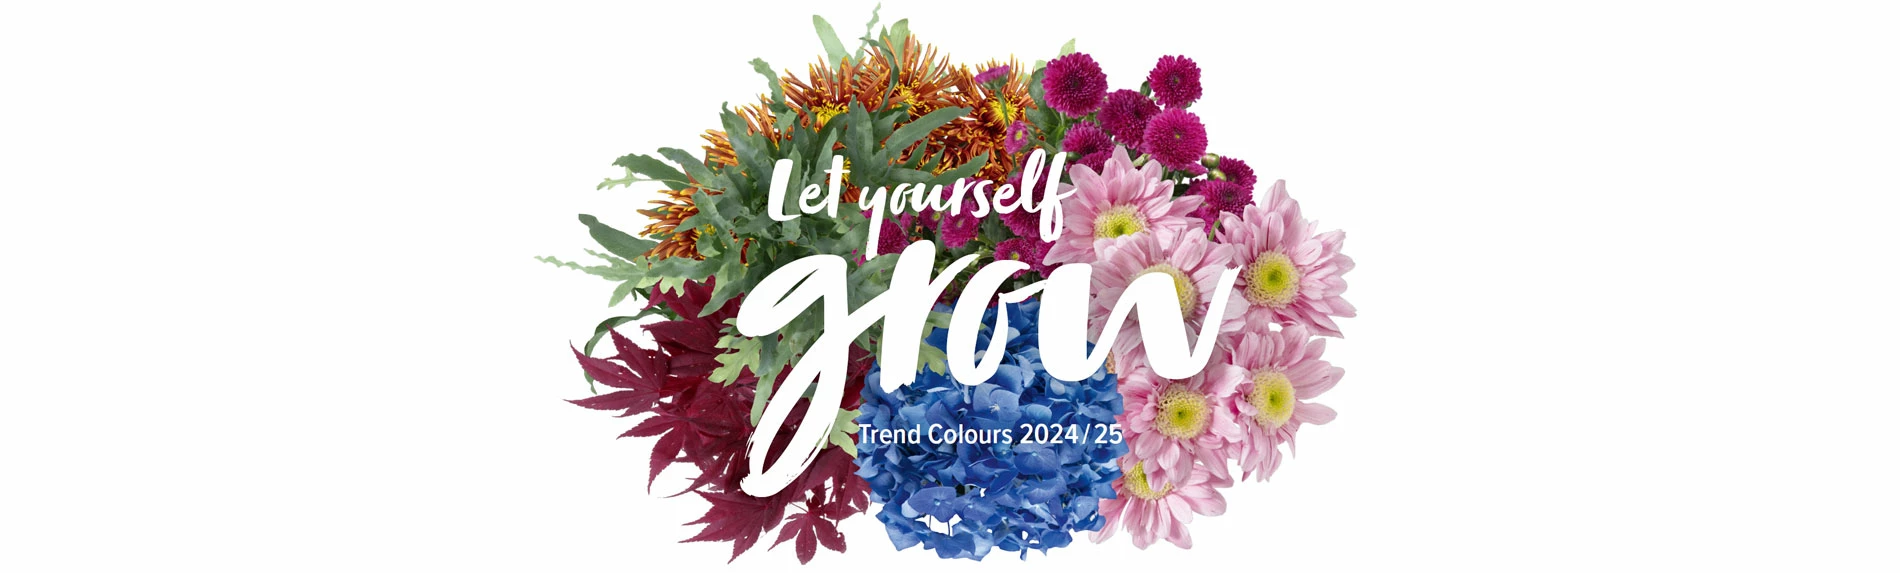 Let yourself grow banner